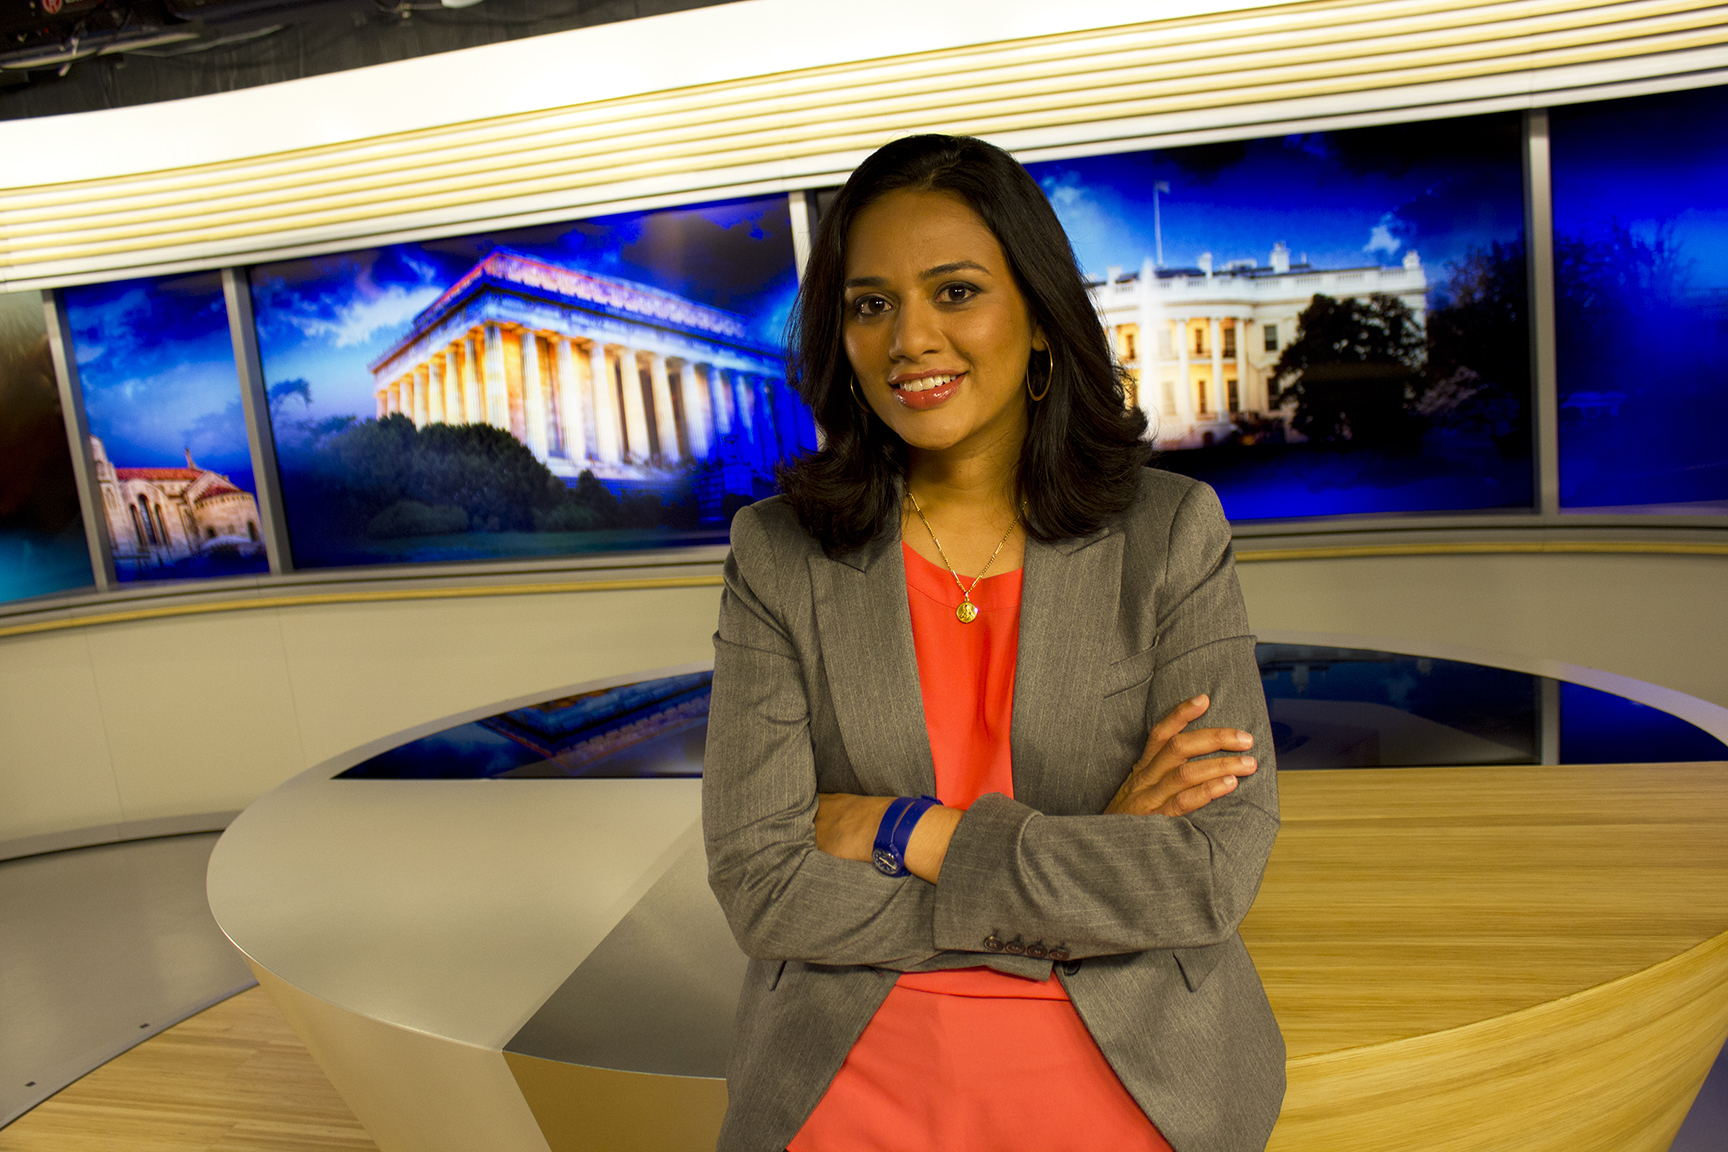 EWTN's Susie Pinto of “EWTN News Nightly” will provide on-the-ground coverage in Mexico for ENN’s daily newscasts.